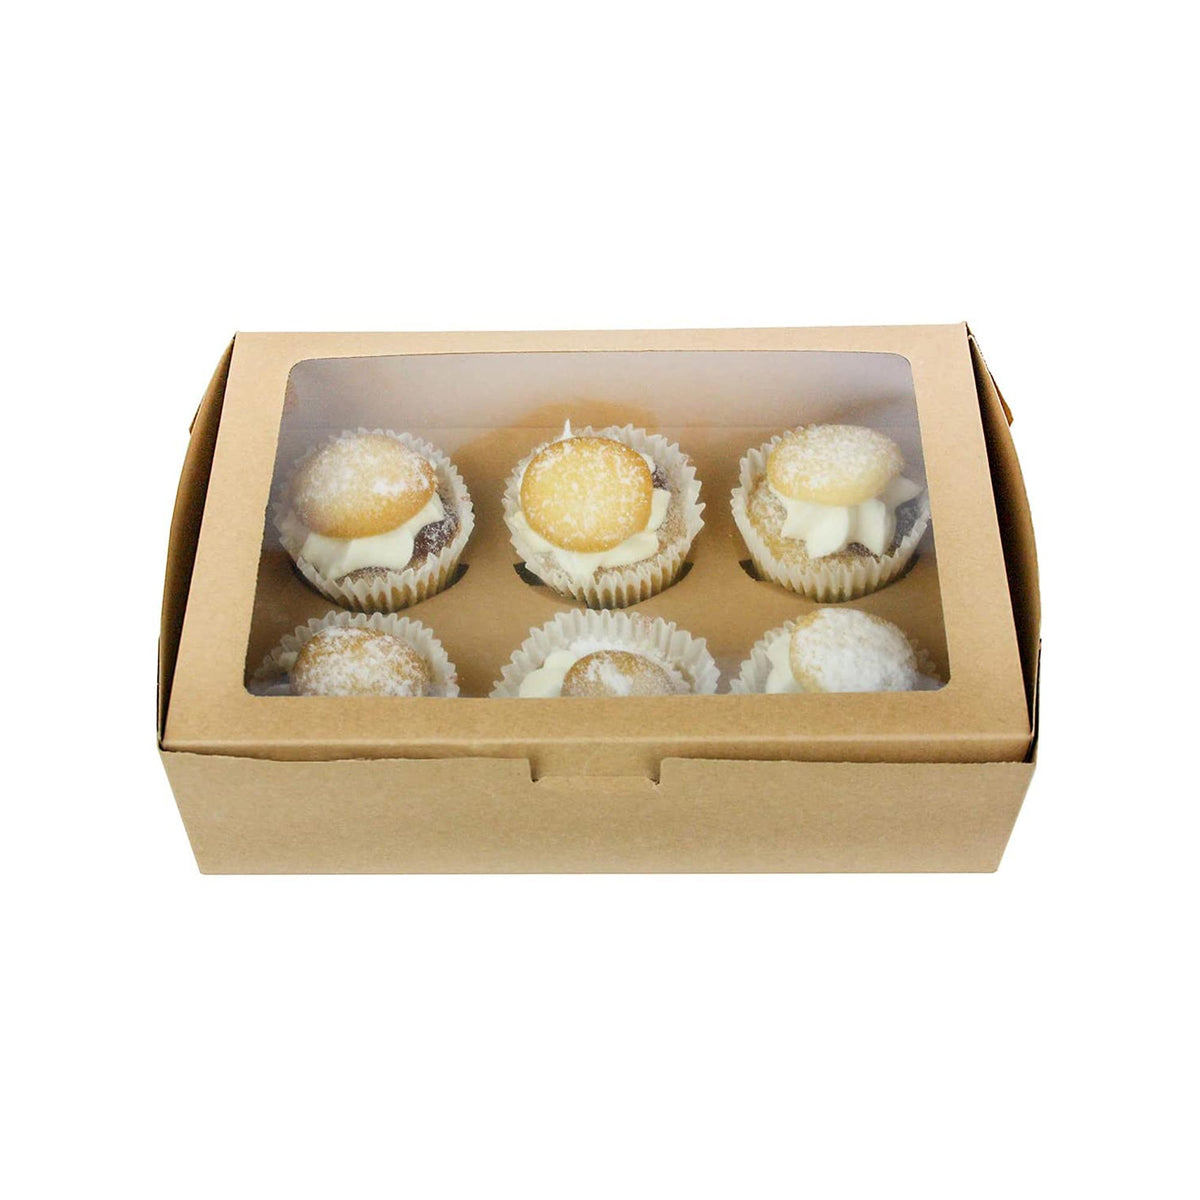 12-Pack Brown Kraft Cupcake Boxes with Clear Window - Holds 6 Cupcakes